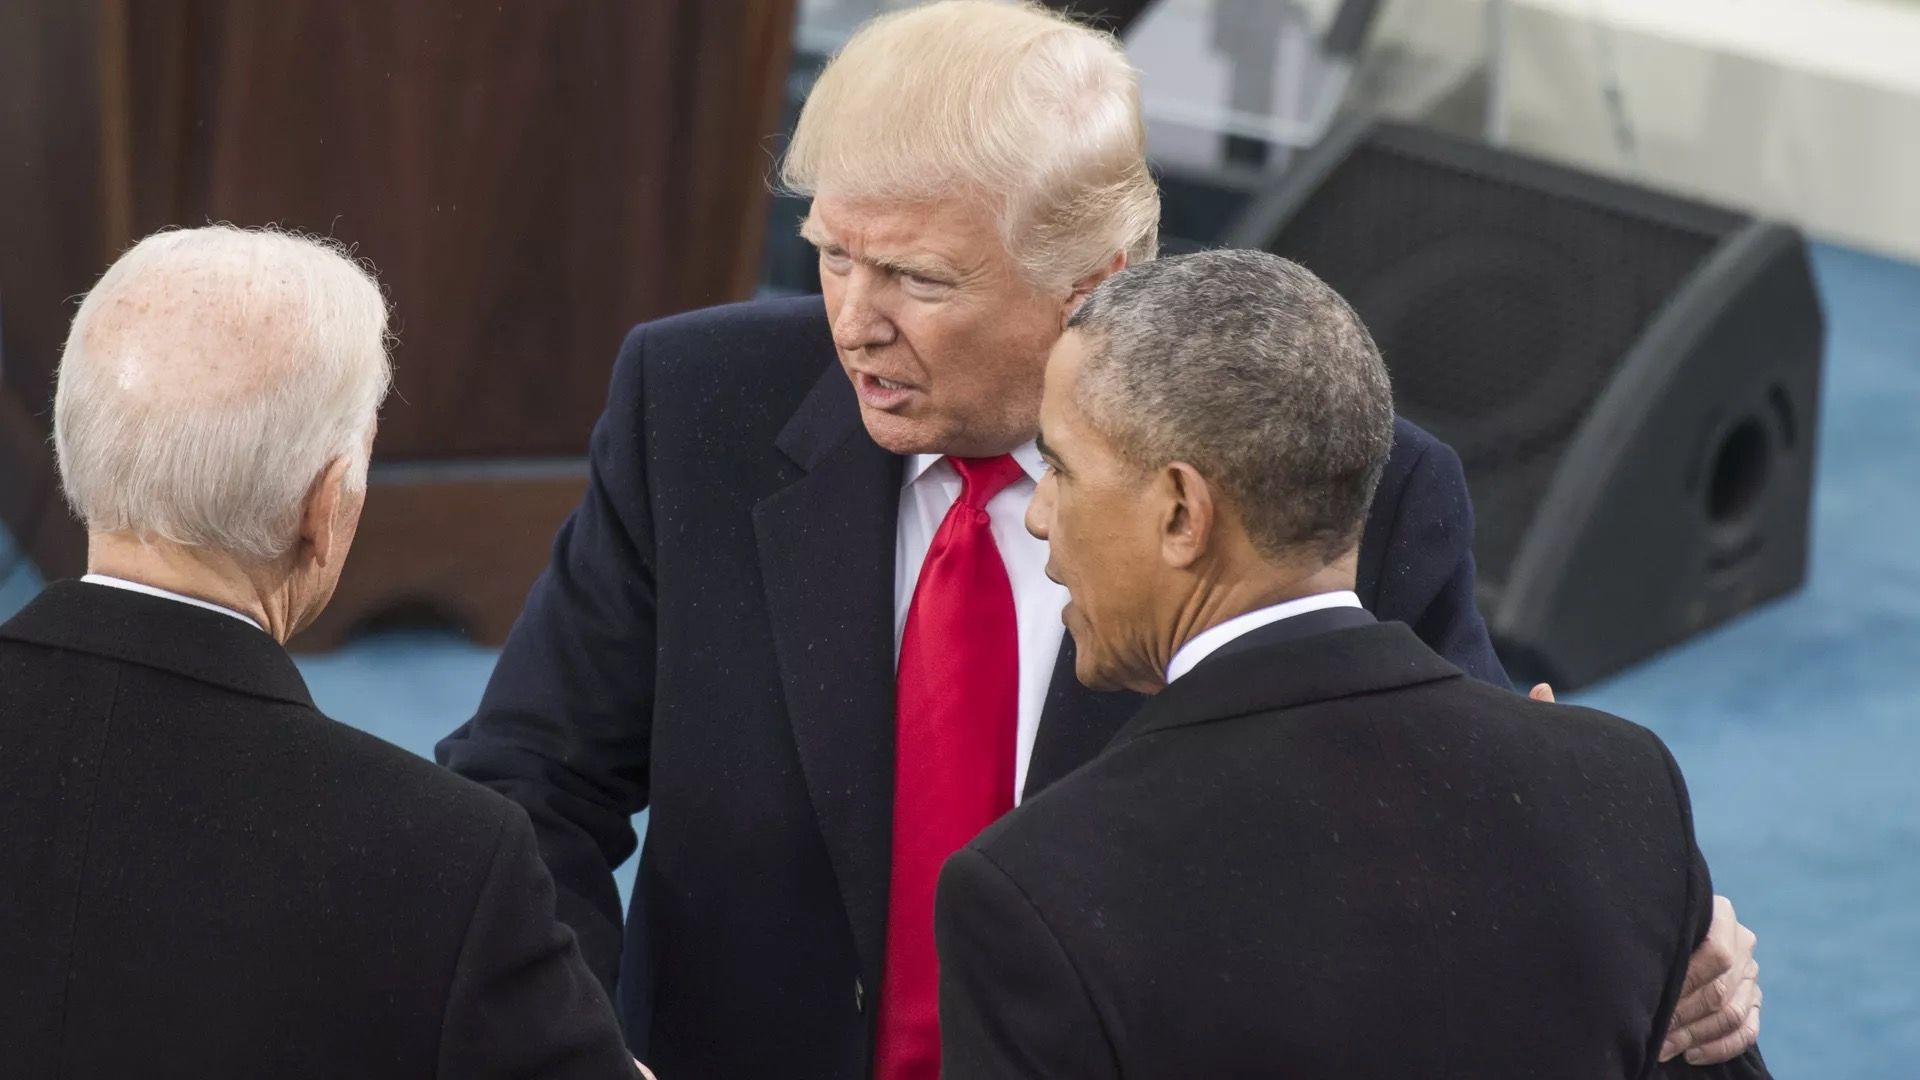 Former President Trump is seen speaking with future President Biden and former President Obama.